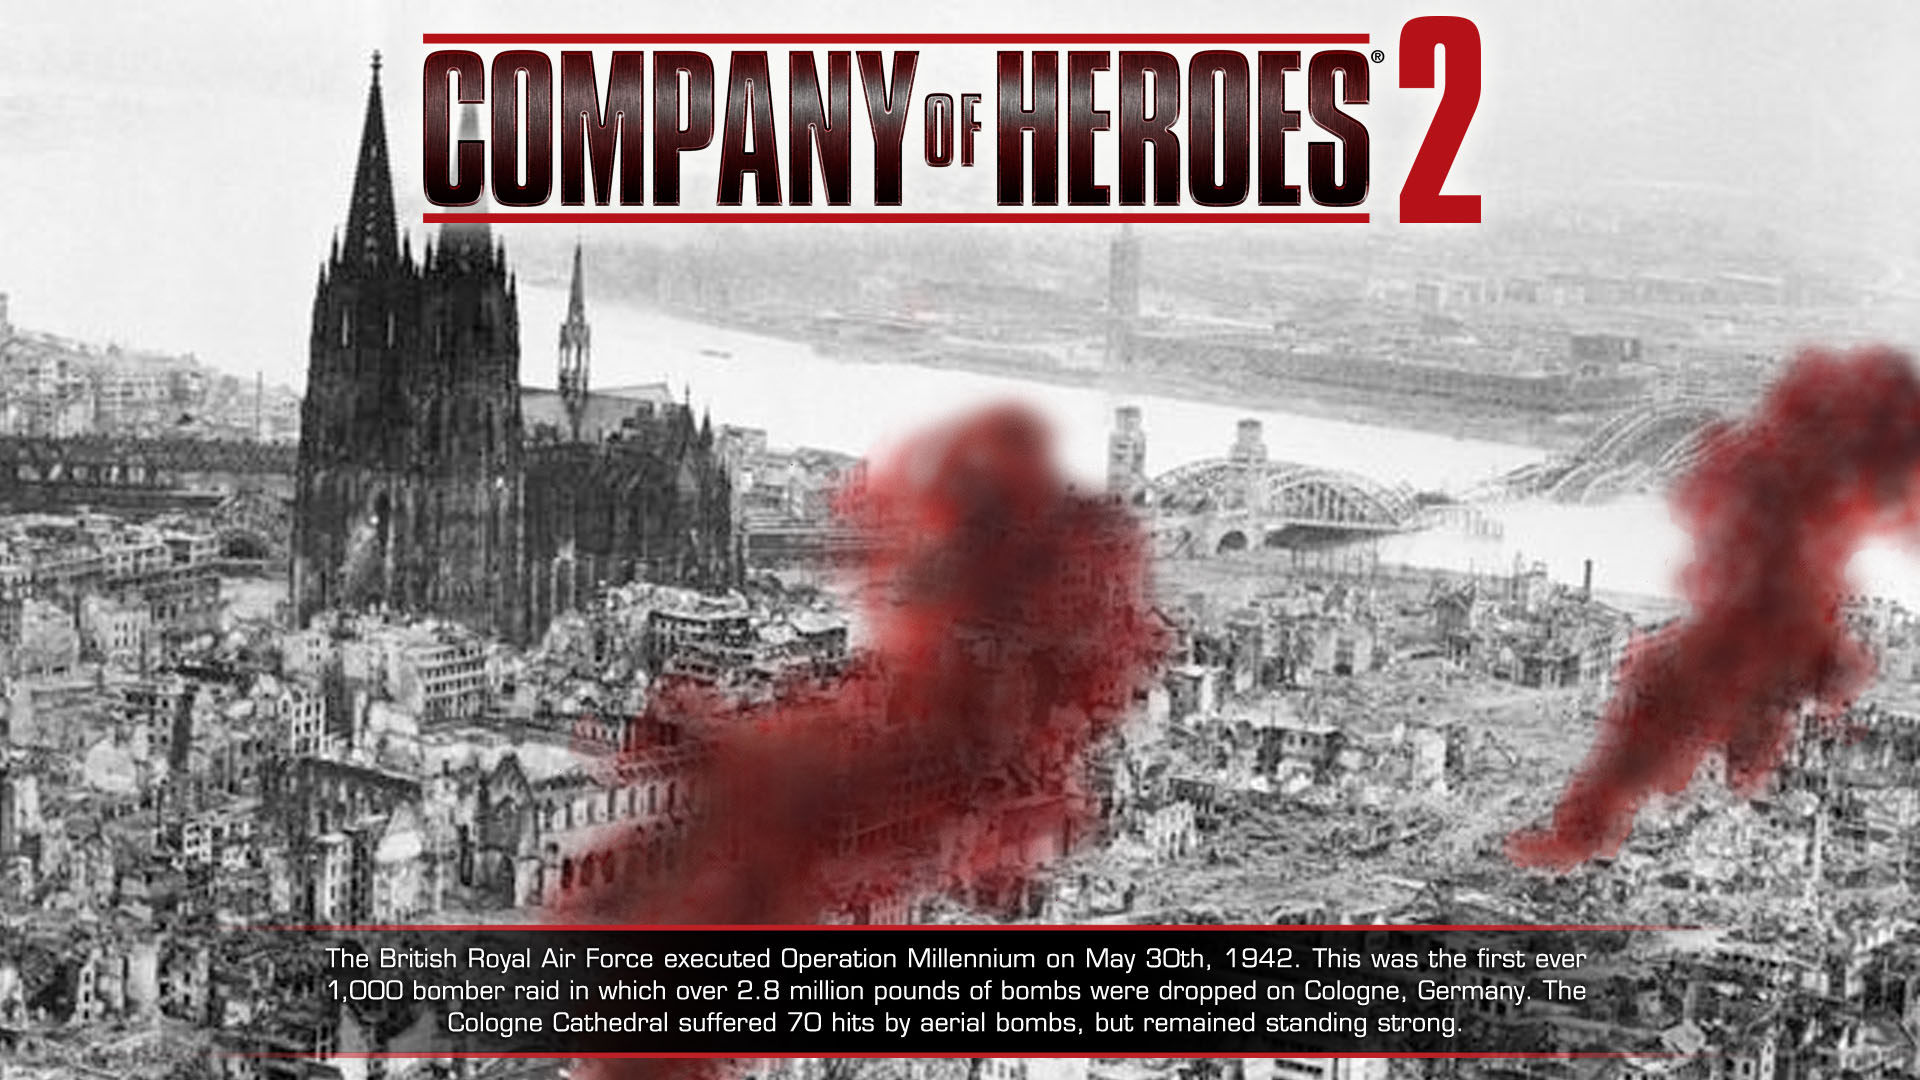 1920x1080 company of heroes 2 backgrounds